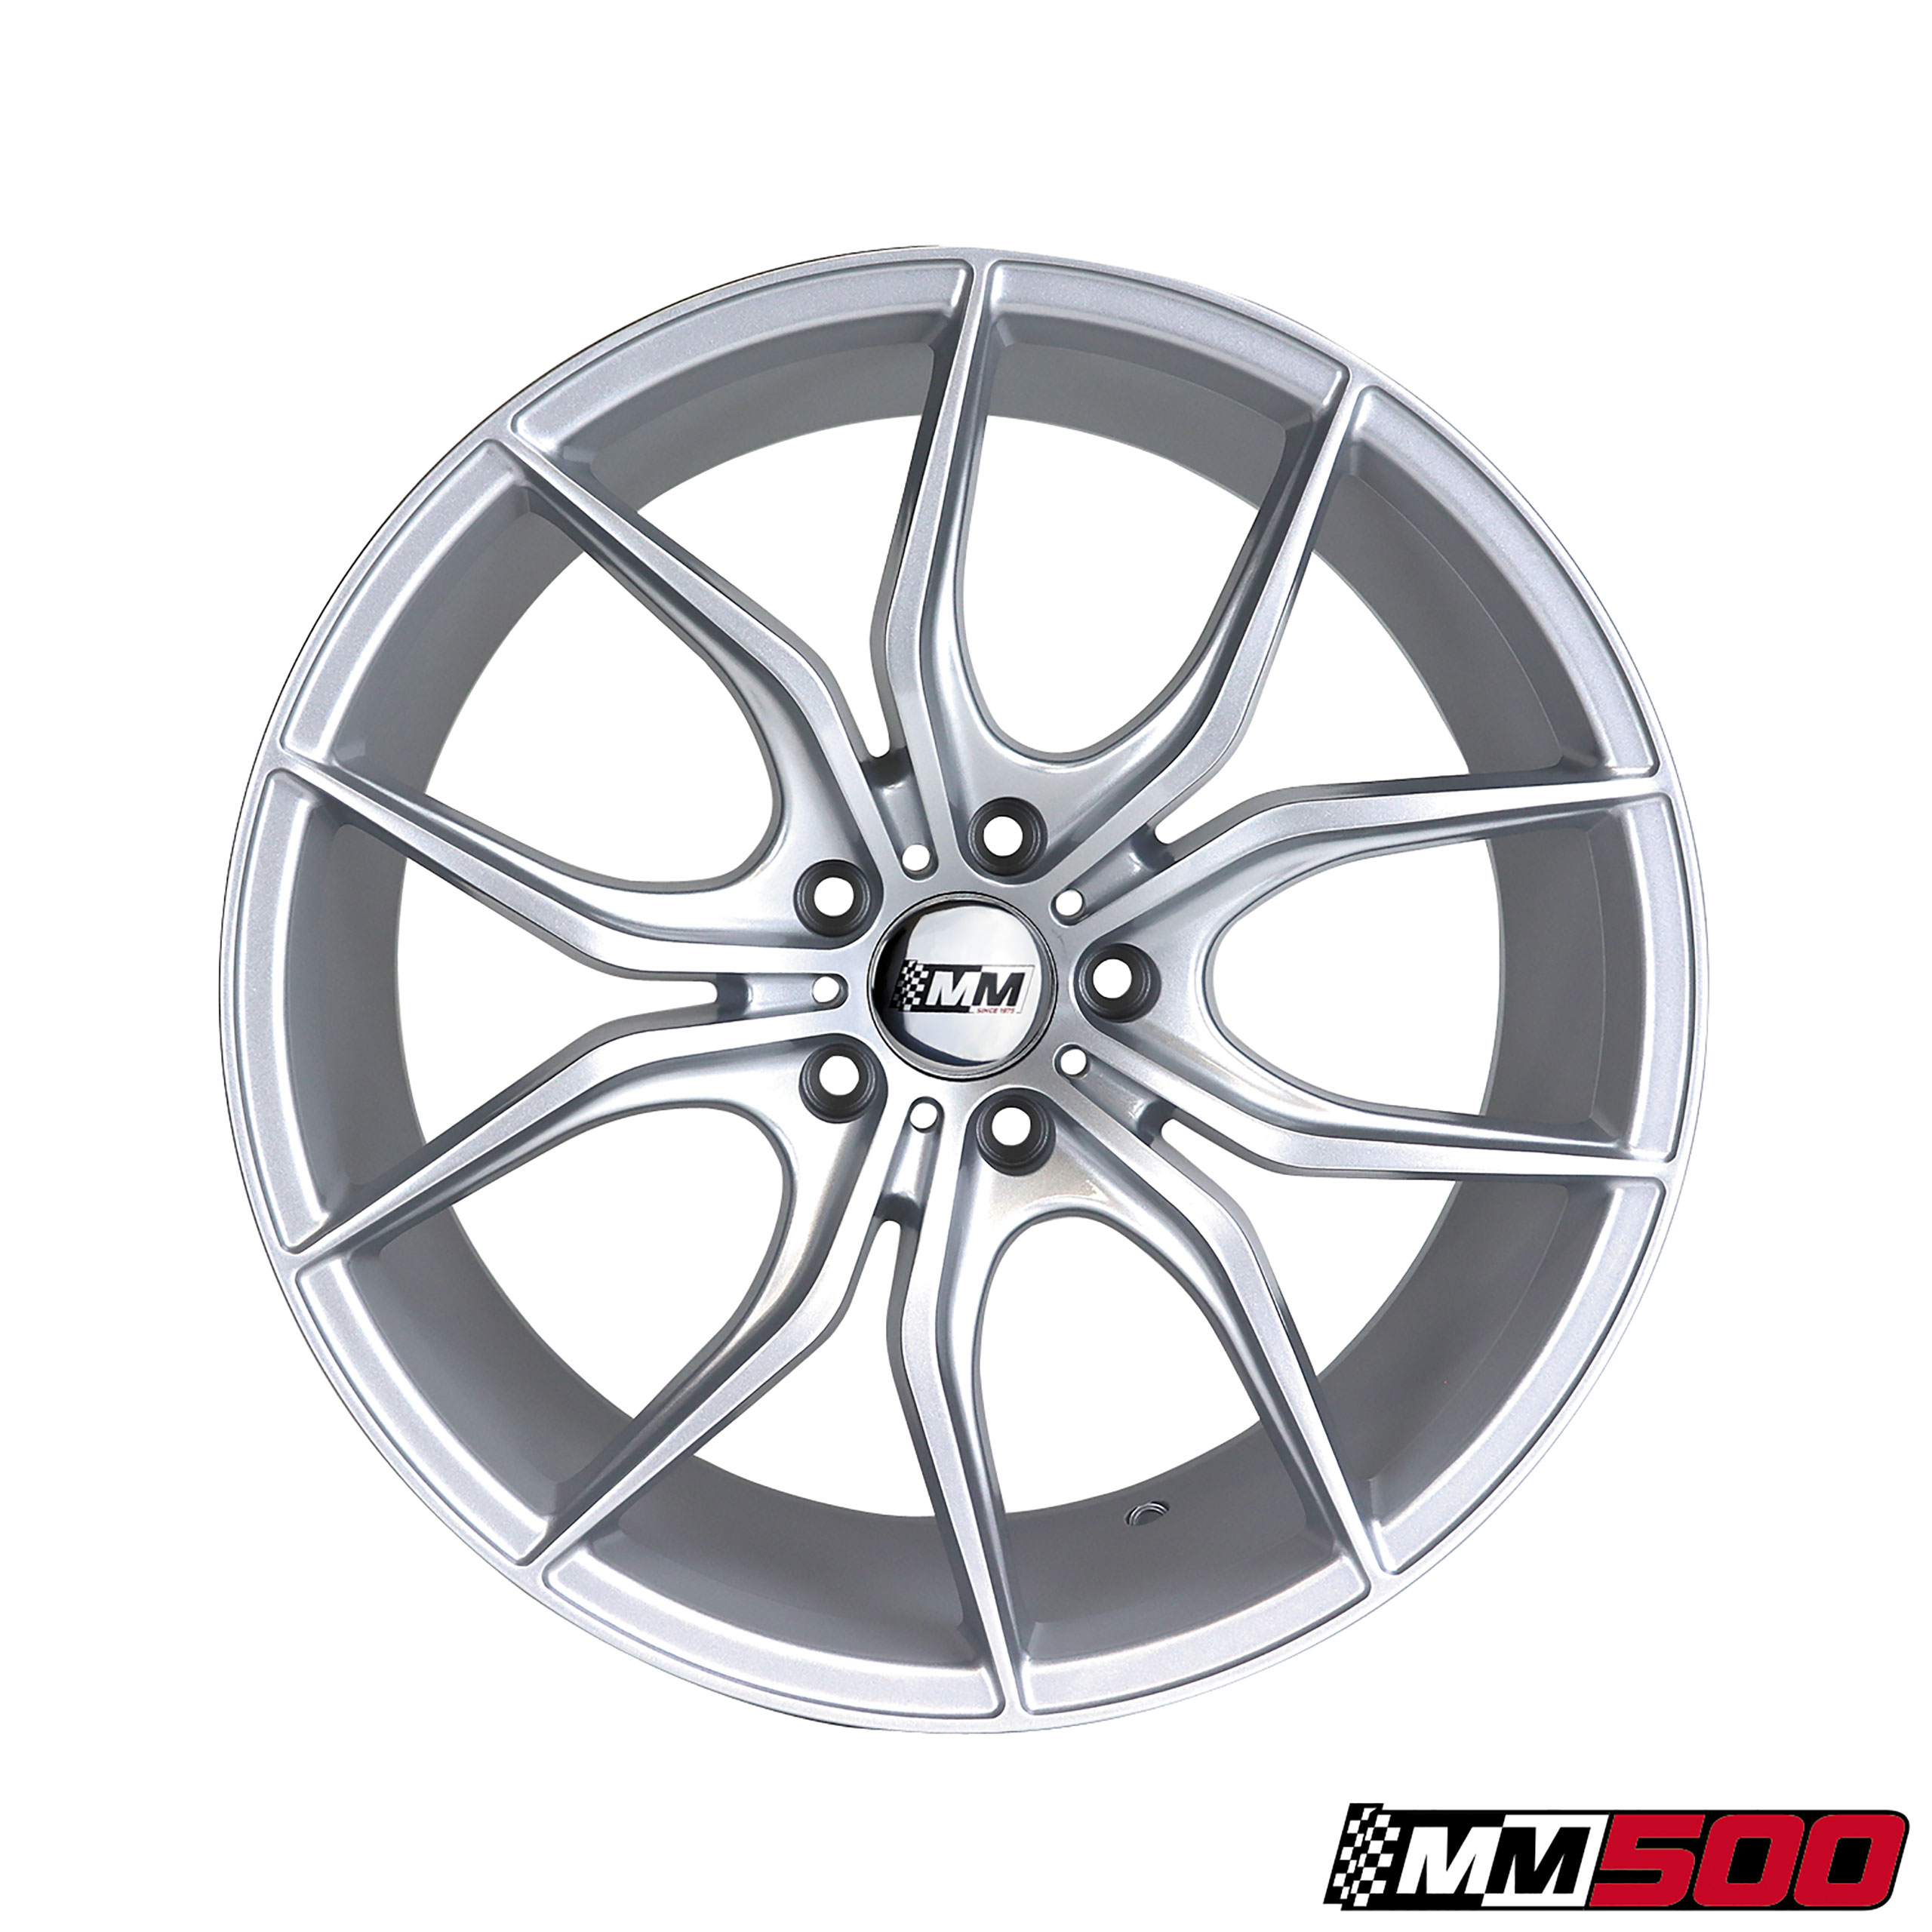 2005-2014 Mustang C6-C7 MM500 19x95 Wheel Silver Rear Only CA-MA12392 